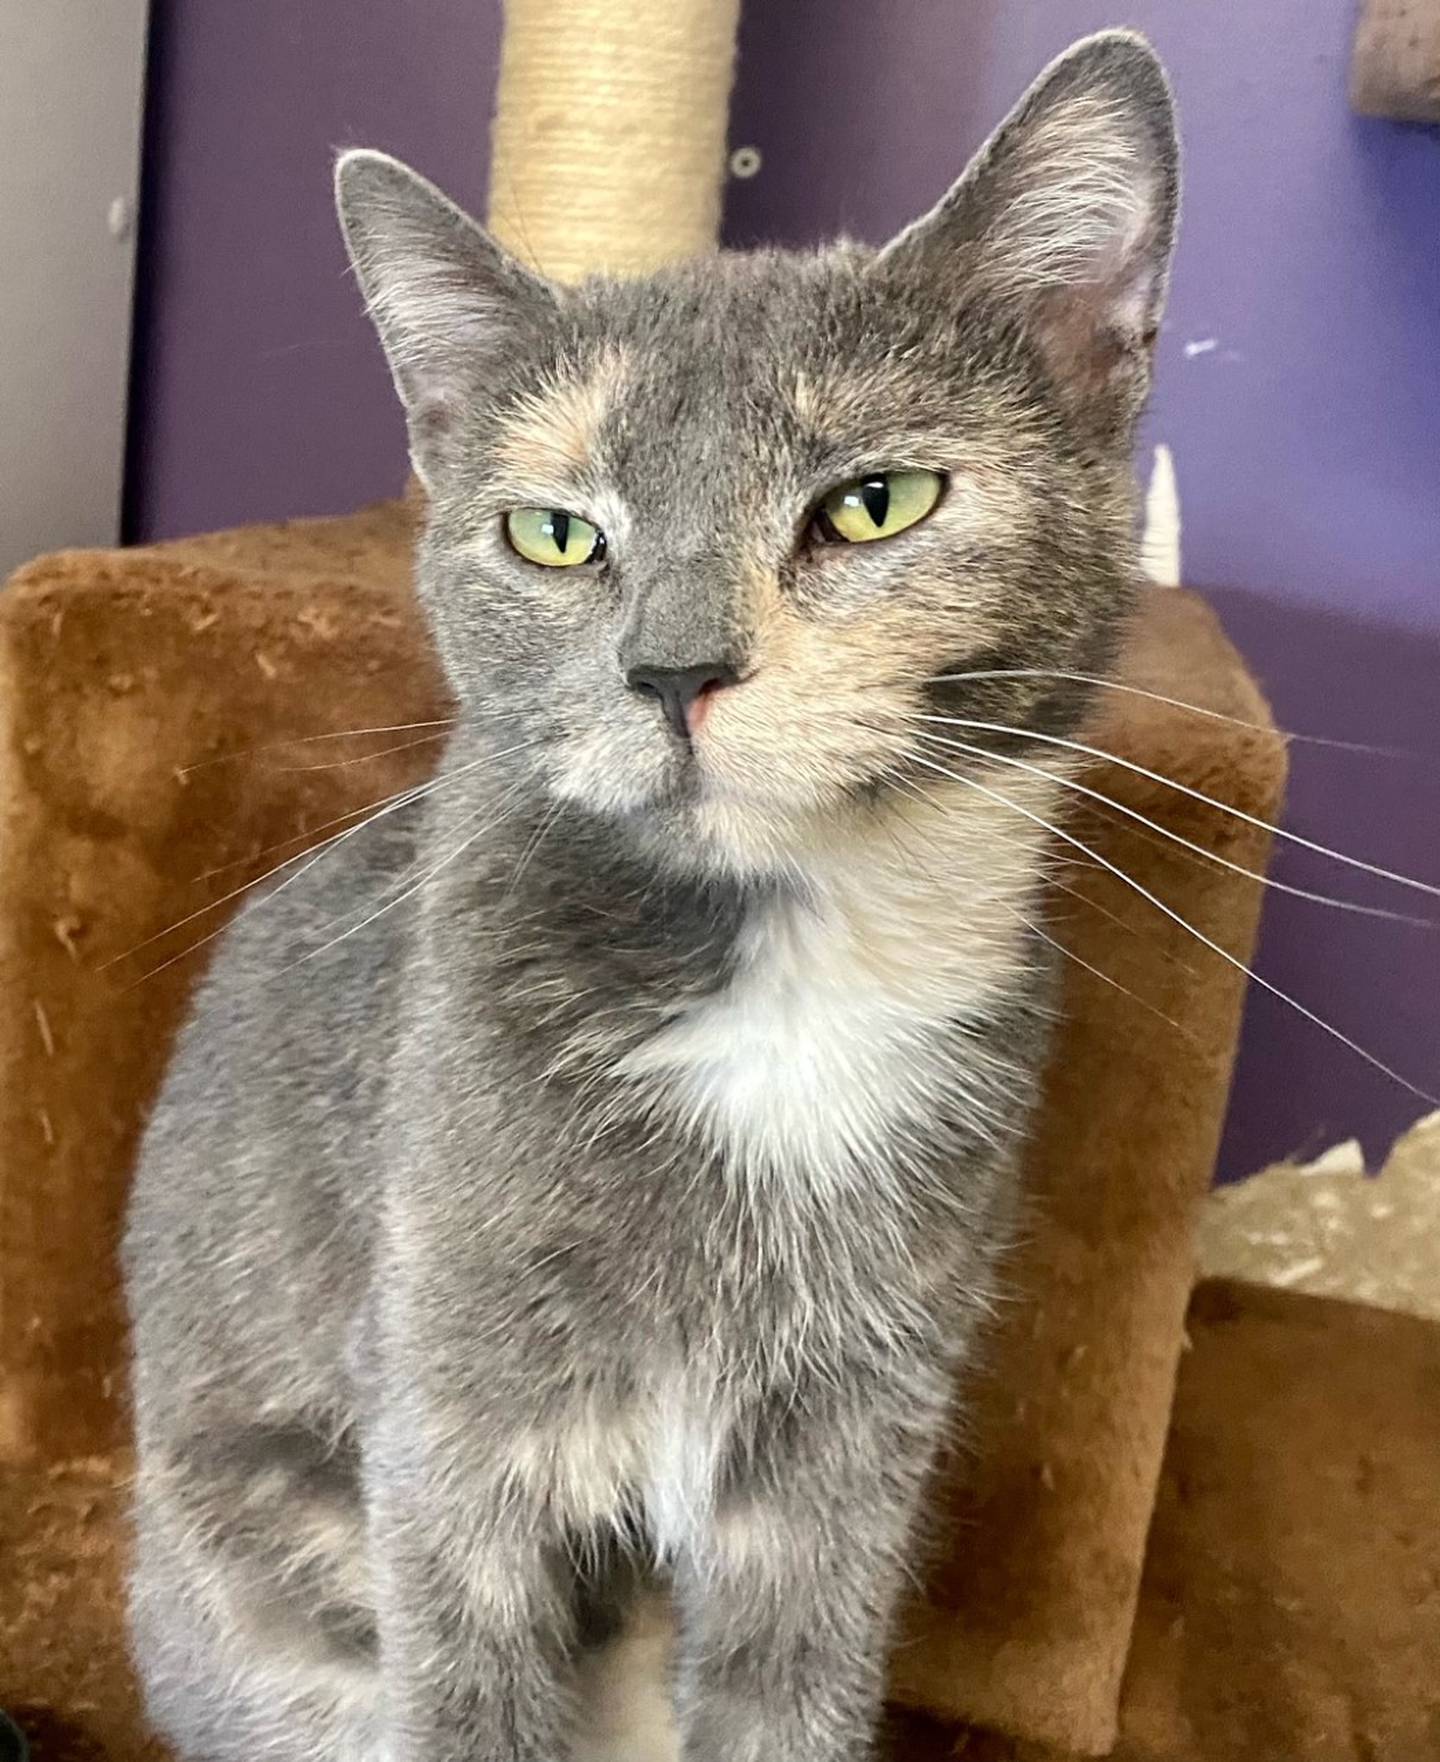 Edie is a 3-year-old domestic shorthair. She is friendly, outgoing, and playful. Edie gets along with other animals and children. She would make a great addition to any family. For more information on Edie, including adoption fees please visit  justanimals.org or call 815-448-2510.